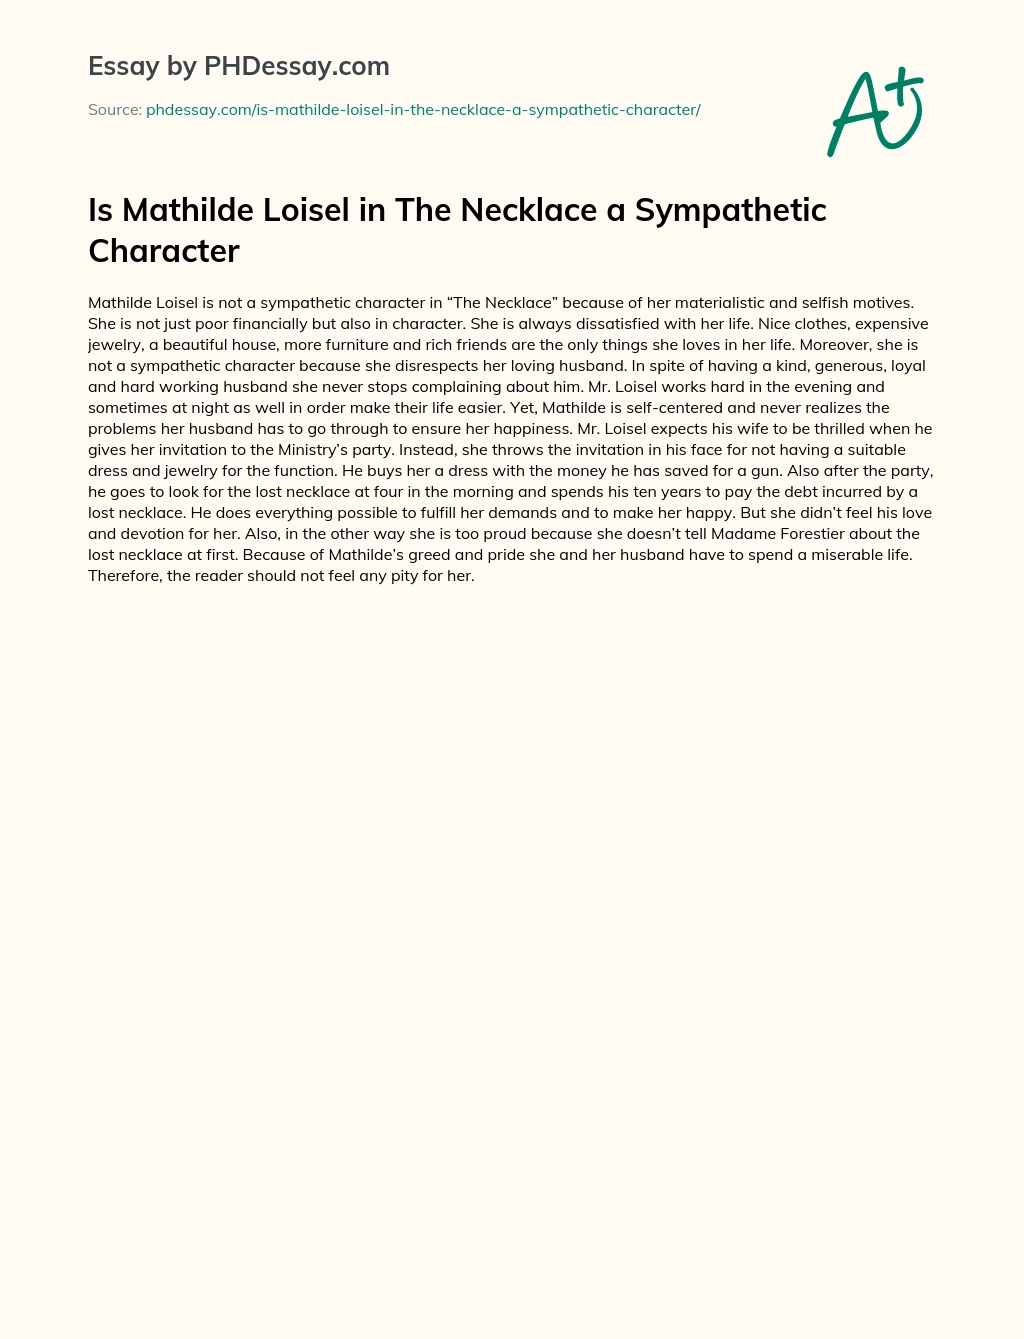 Character Analysis of 'Mathilde Loisel' in the Maupassant's “The Necklace”  : Free Download, Borrow, and Streaming : Internet Archive